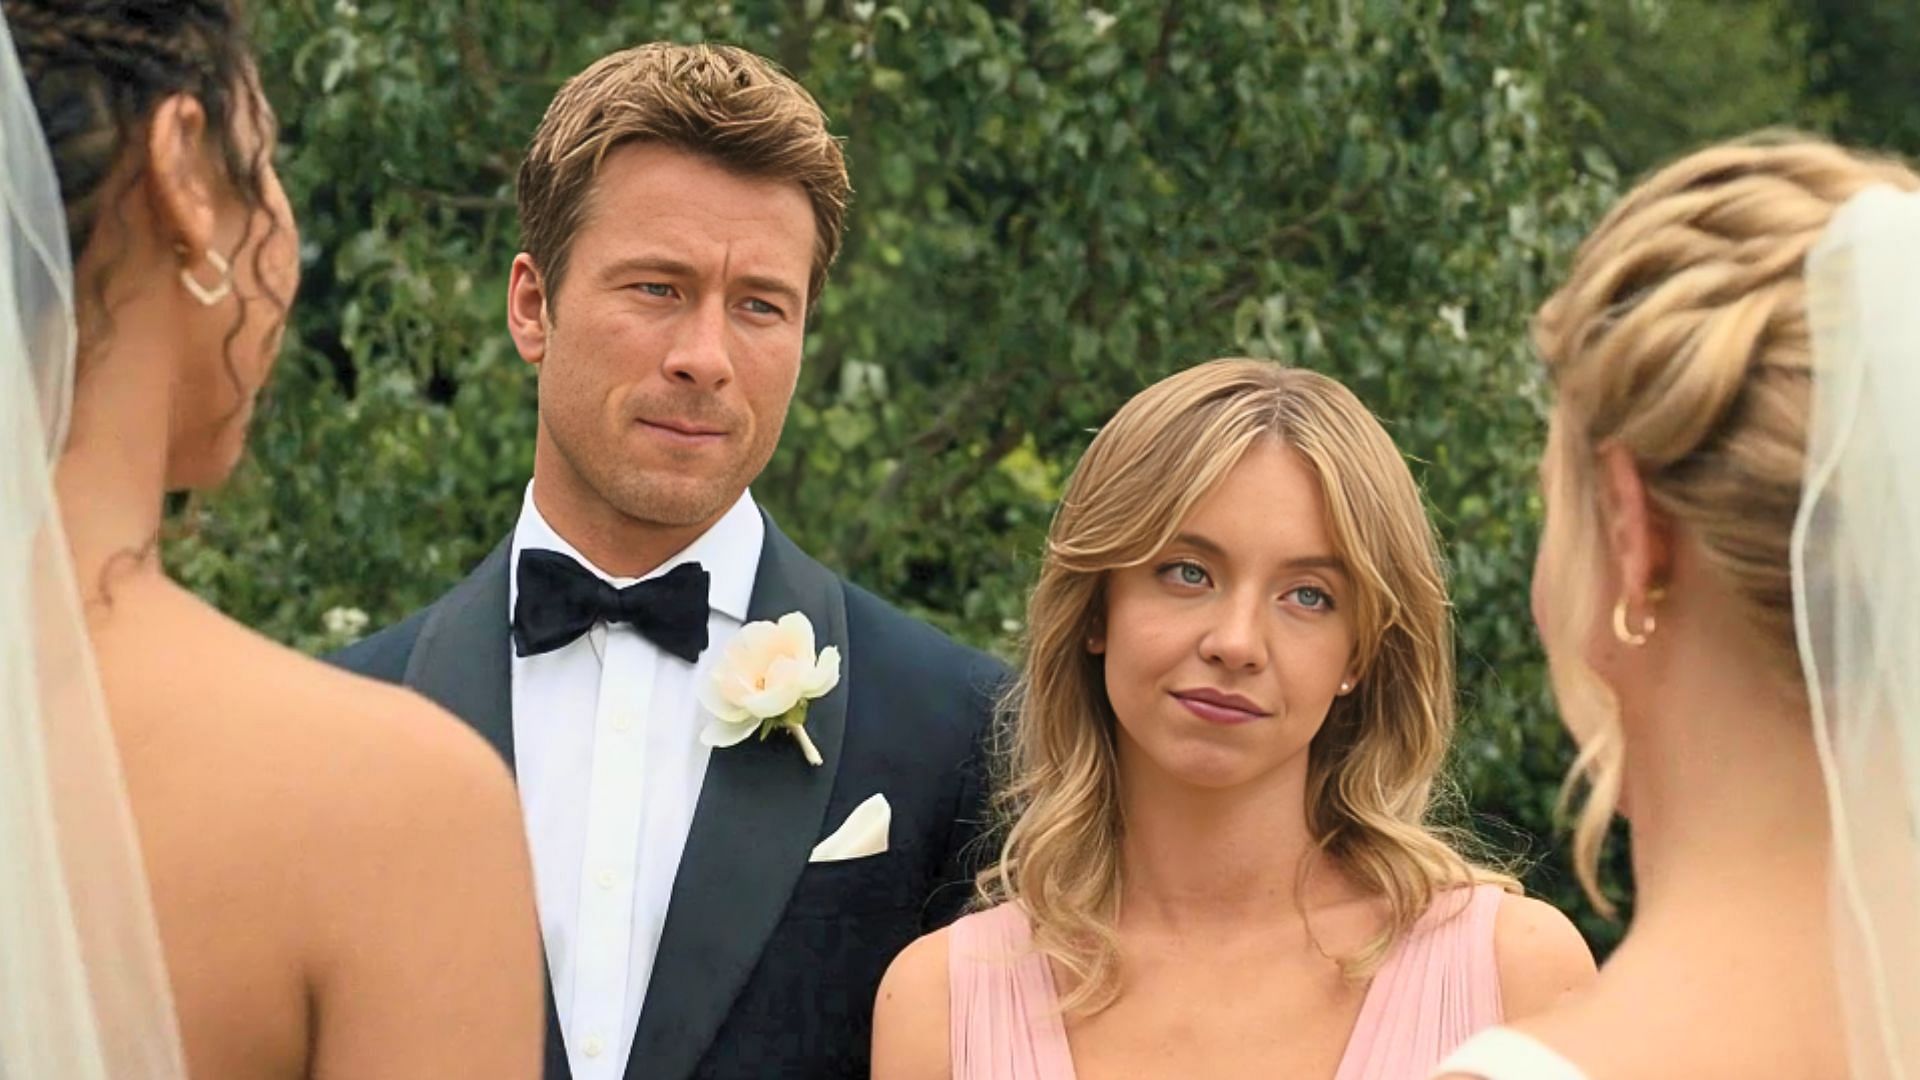  Glen Powell (left) and Sydney Sweeney (right) in a still from Anyone But You (Image via Netflix)